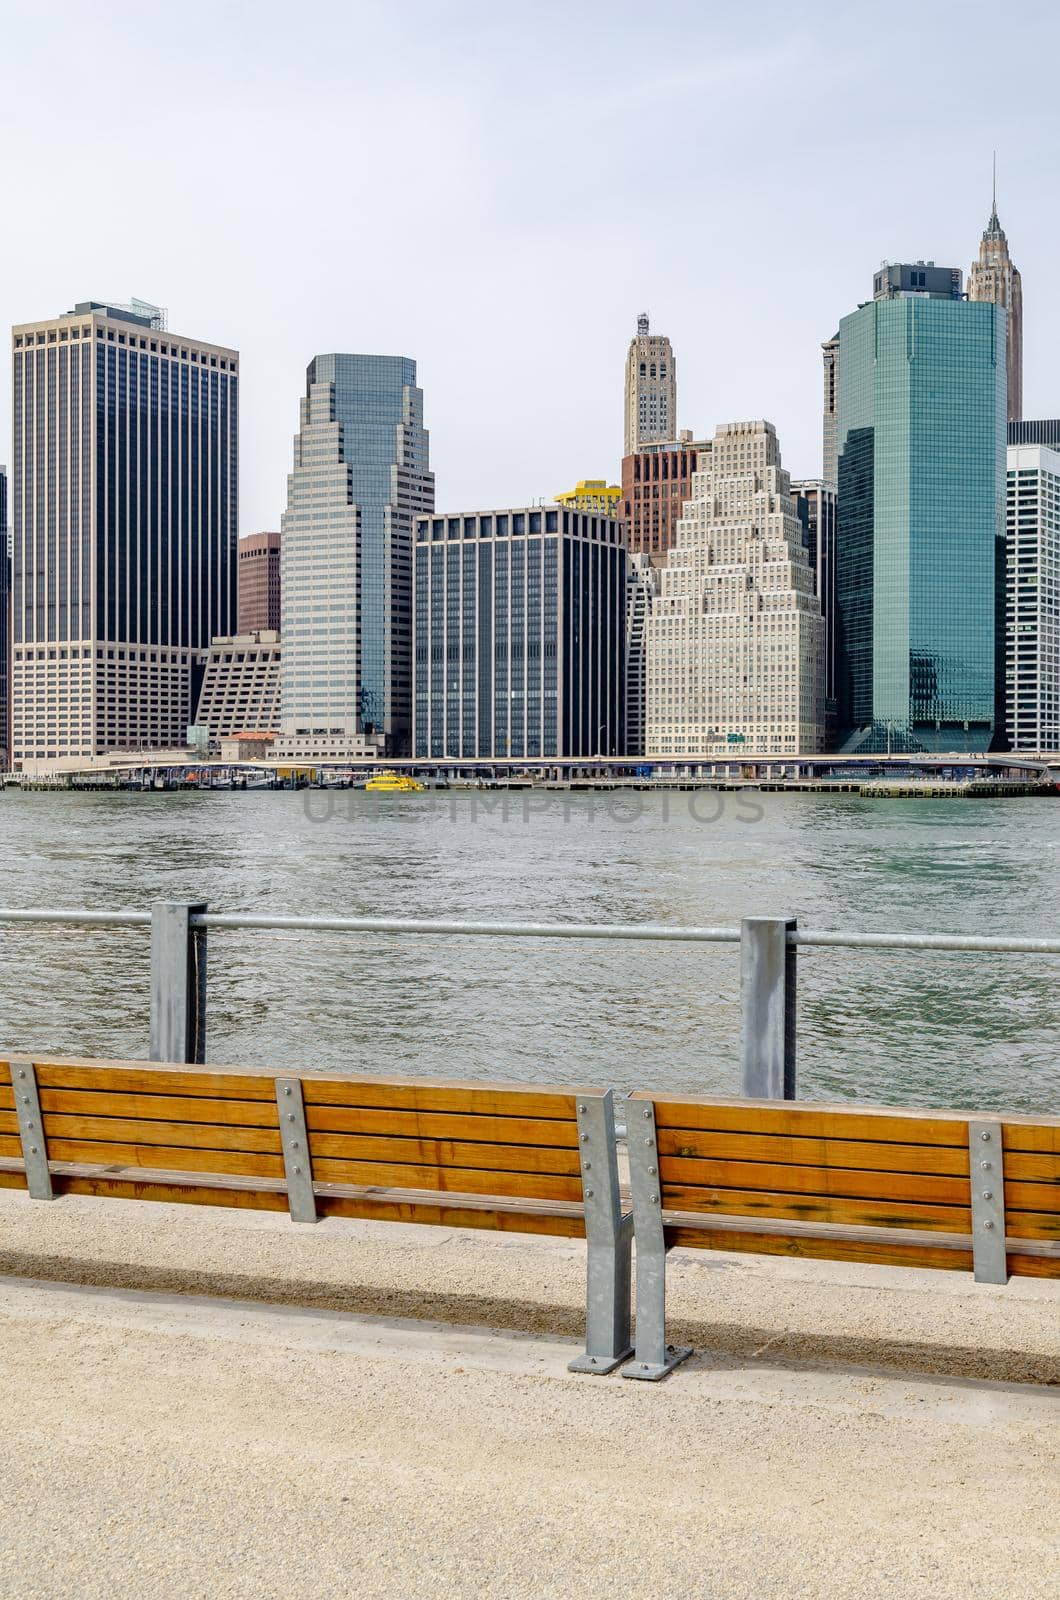 Skyline of Manhattan, New York City, view from waterfront in Brooklyn, wood benches standing in front of a fence at the river bank, vertical